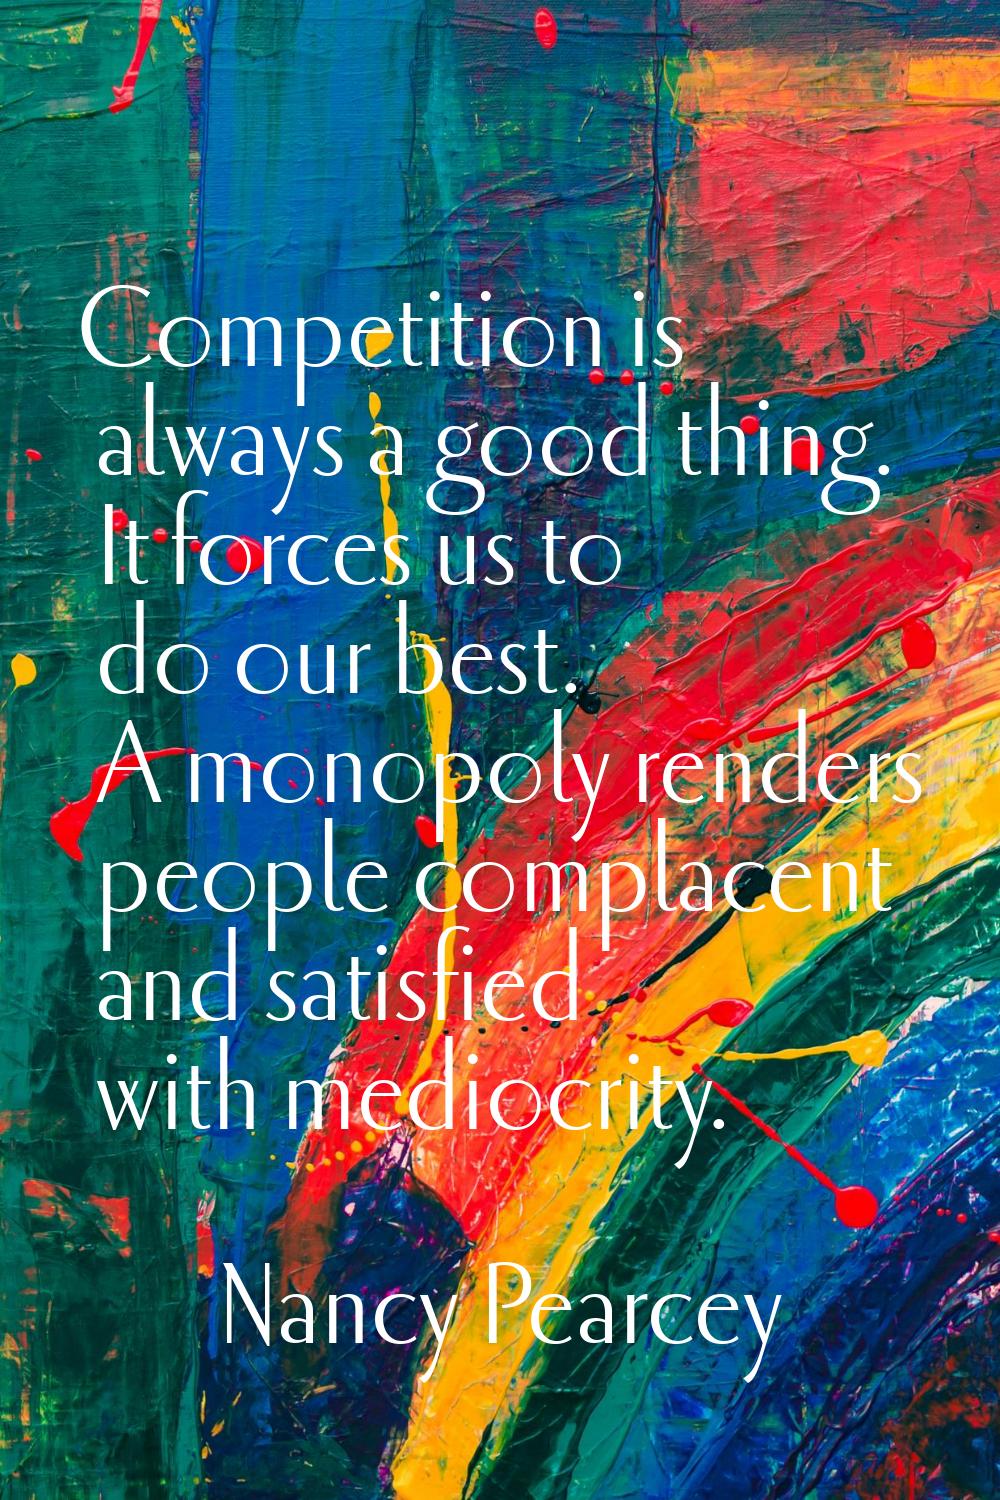 Competition is always a good thing. It forces us to do our best. A monopoly renders people complace